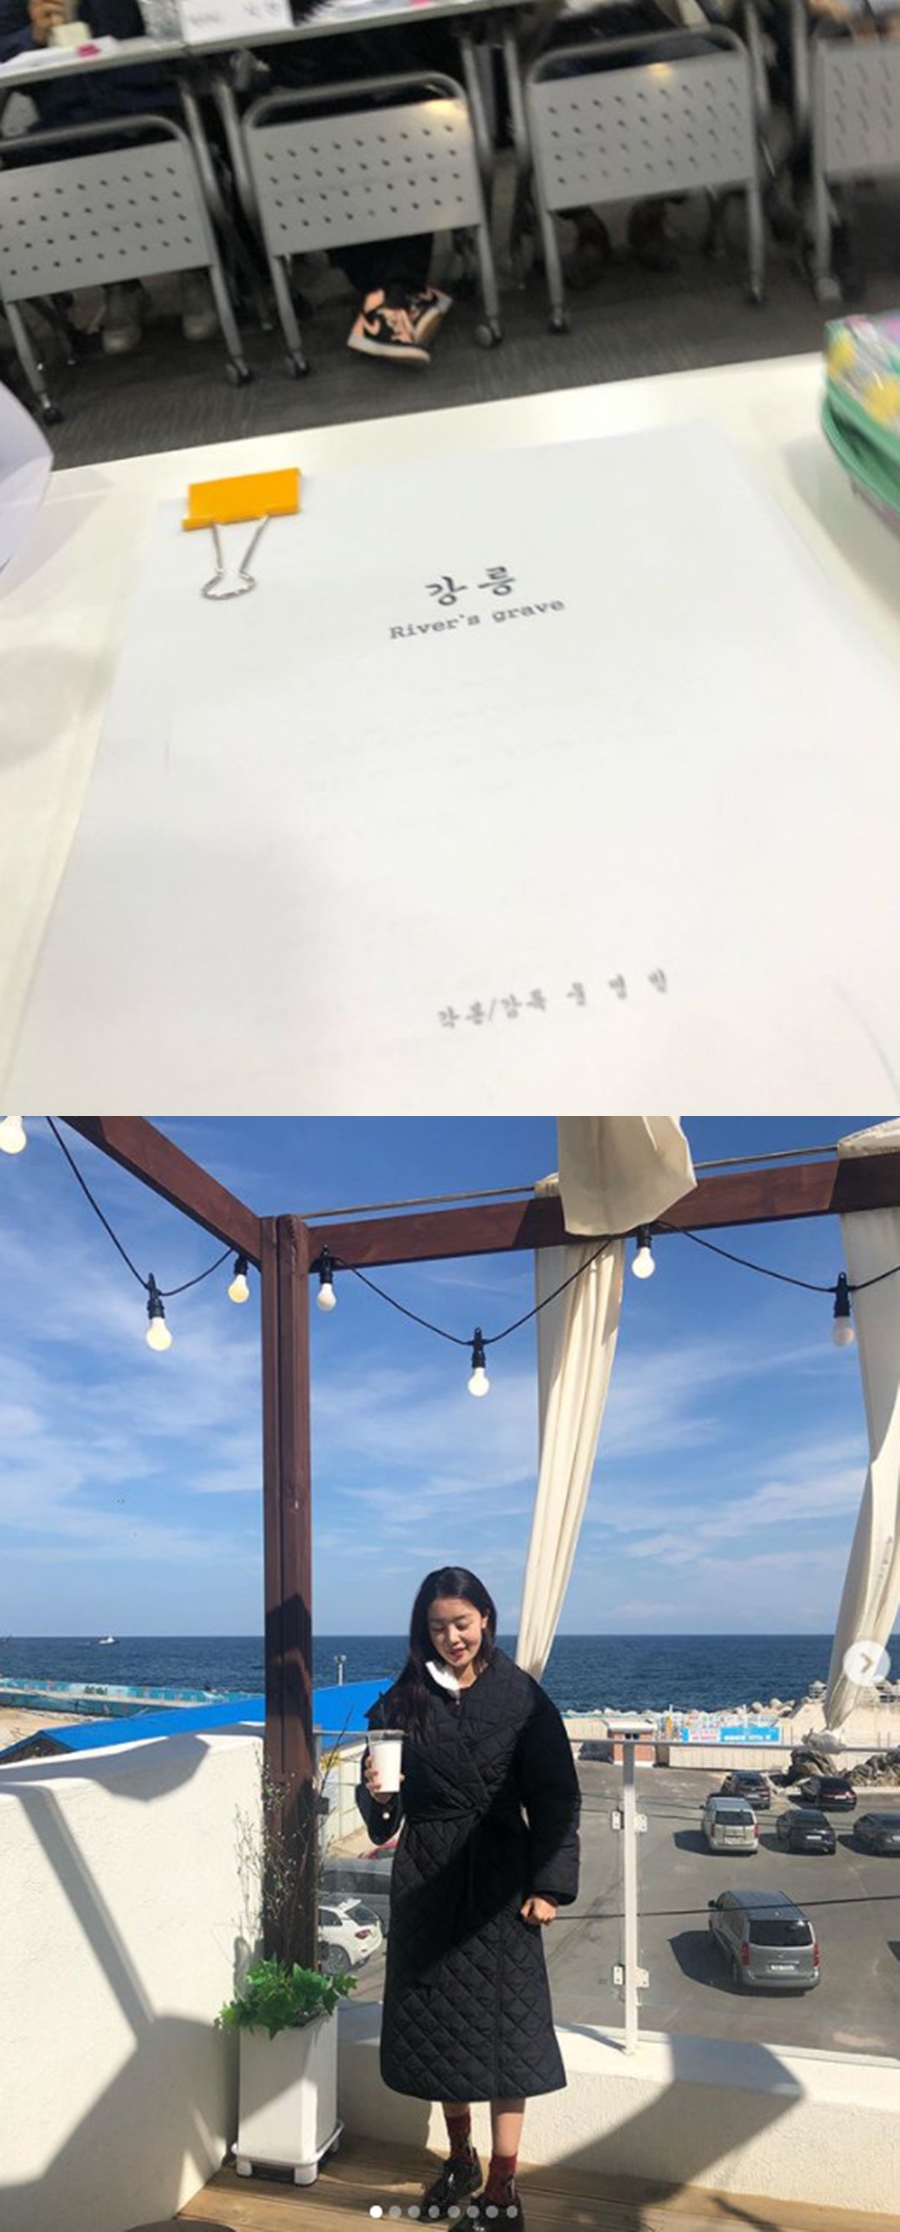 Actor Han Sun-hwa is expected to make his screen debut with the movie Gyeonggang Line.Han Sun-hwa added a wave, praying hands and slate emojis to her Instagram on Wednesday, along with a picture.Inside the photo is a synopsis of Gyeonggang Line written as Screenplay and director Yoon Jong Bin.The movie Gyeonggang Line is a noir work about the stories of the gangsters who want to take the Gyonggang Line for their own benefit.Actor Jang Hyuk will play the role of a Korean-born gangster who has played the lead role in the private sector and will show a cold-blooded villain.With the crank-in ahead of this month, Han Sun-hwa made a surprise announcement of coffee drinking at the Gyonggang Line, and he gave fans the news of his appearance on the Gyeonggang Line.Especially Gyeonggang Line is expected to be a screen debut for Han Sun-hwa.Han Sun-hwa, who has been well received for his impressive acting skills in Drama, is attracting attention as to what role he will play in the noir movie Gyeonggang Line.=